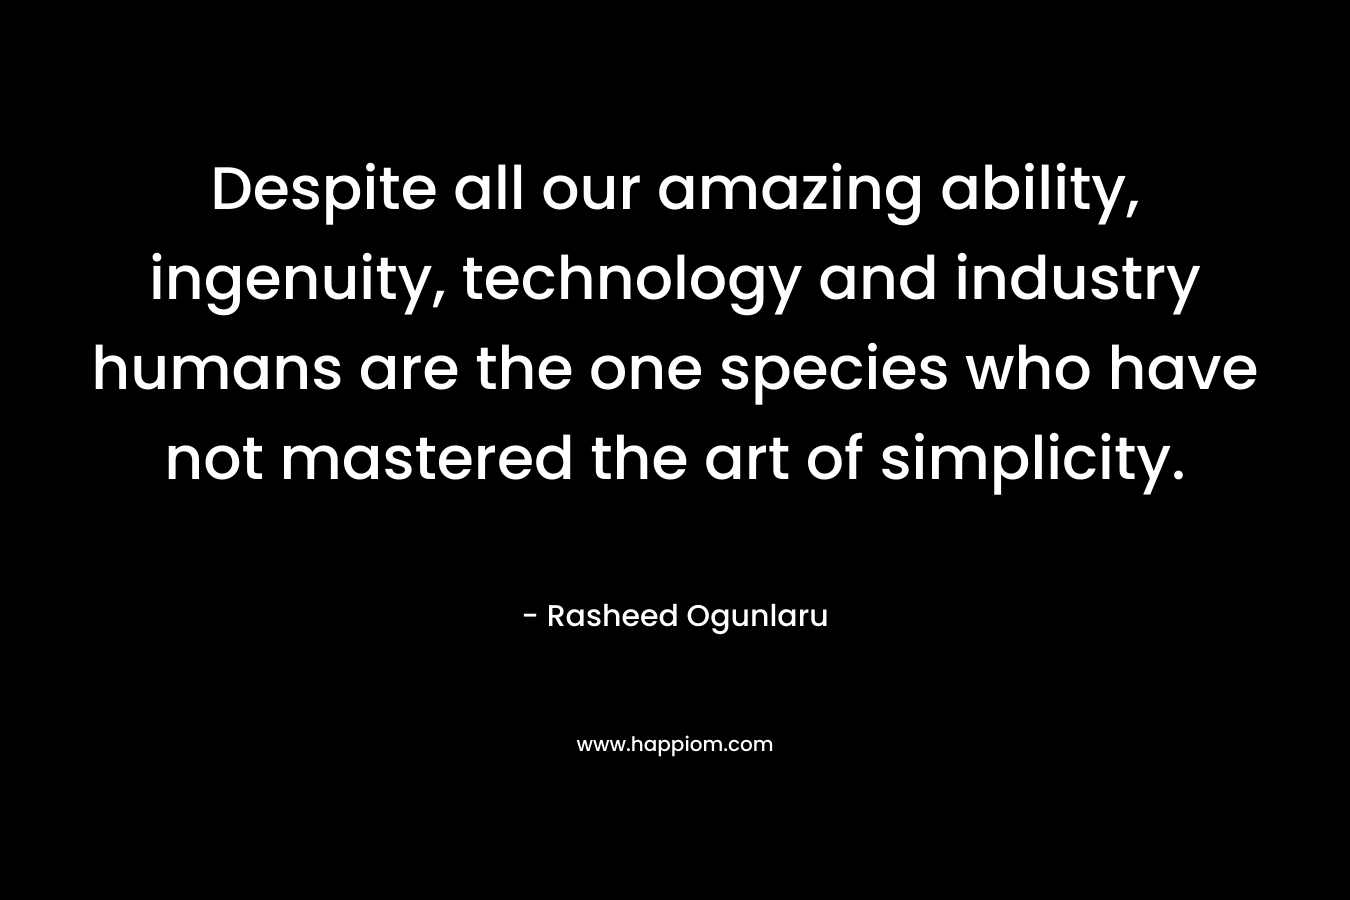 Despite all our amazing ability, ingenuity, technology and industry humans are the one species who have not mastered the art of simplicity.